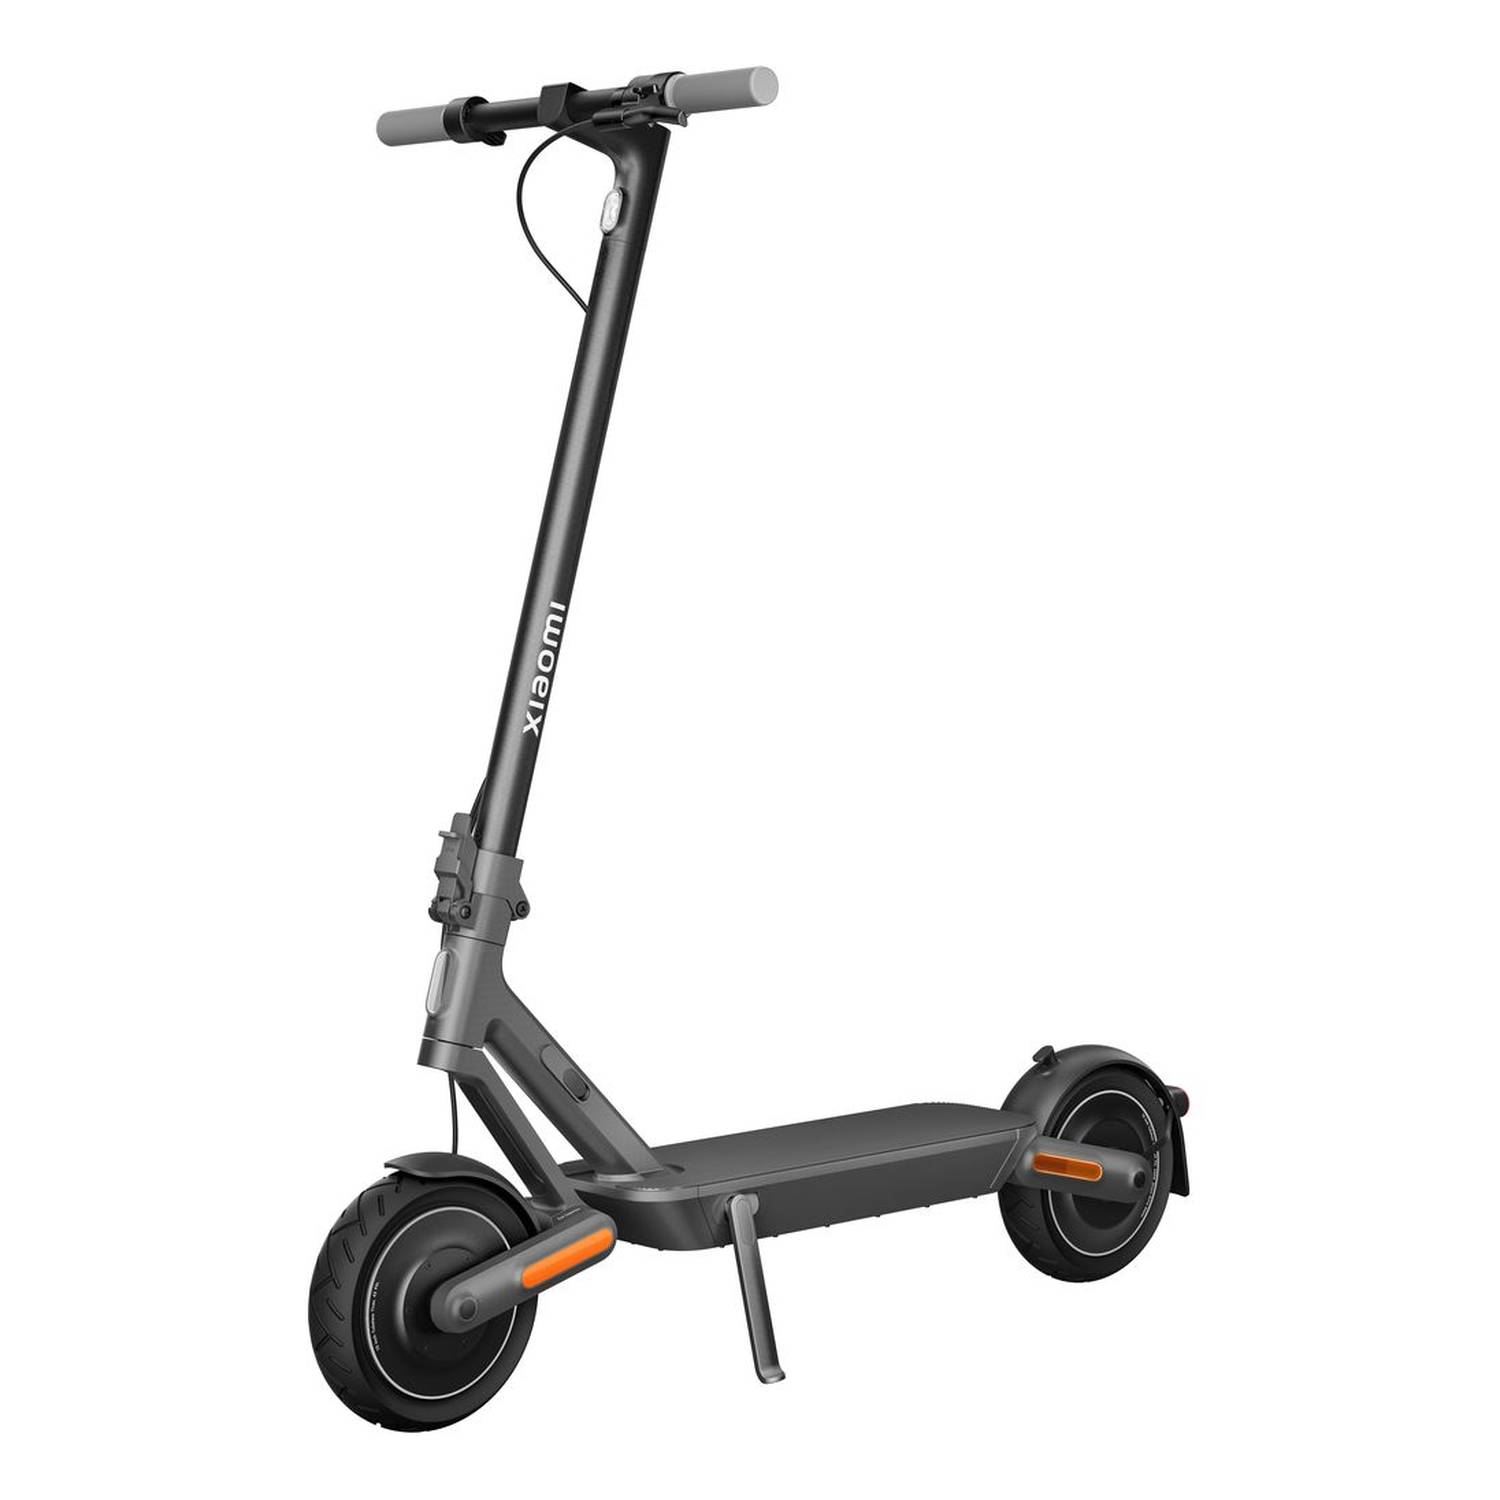 Xiaomi Mi Electric Scooter 4 Pro, Max Speed 18.6 MPH, Long-Range Battery,  Foldable and Portable at Rs 65000, E Scooter in New Delhi